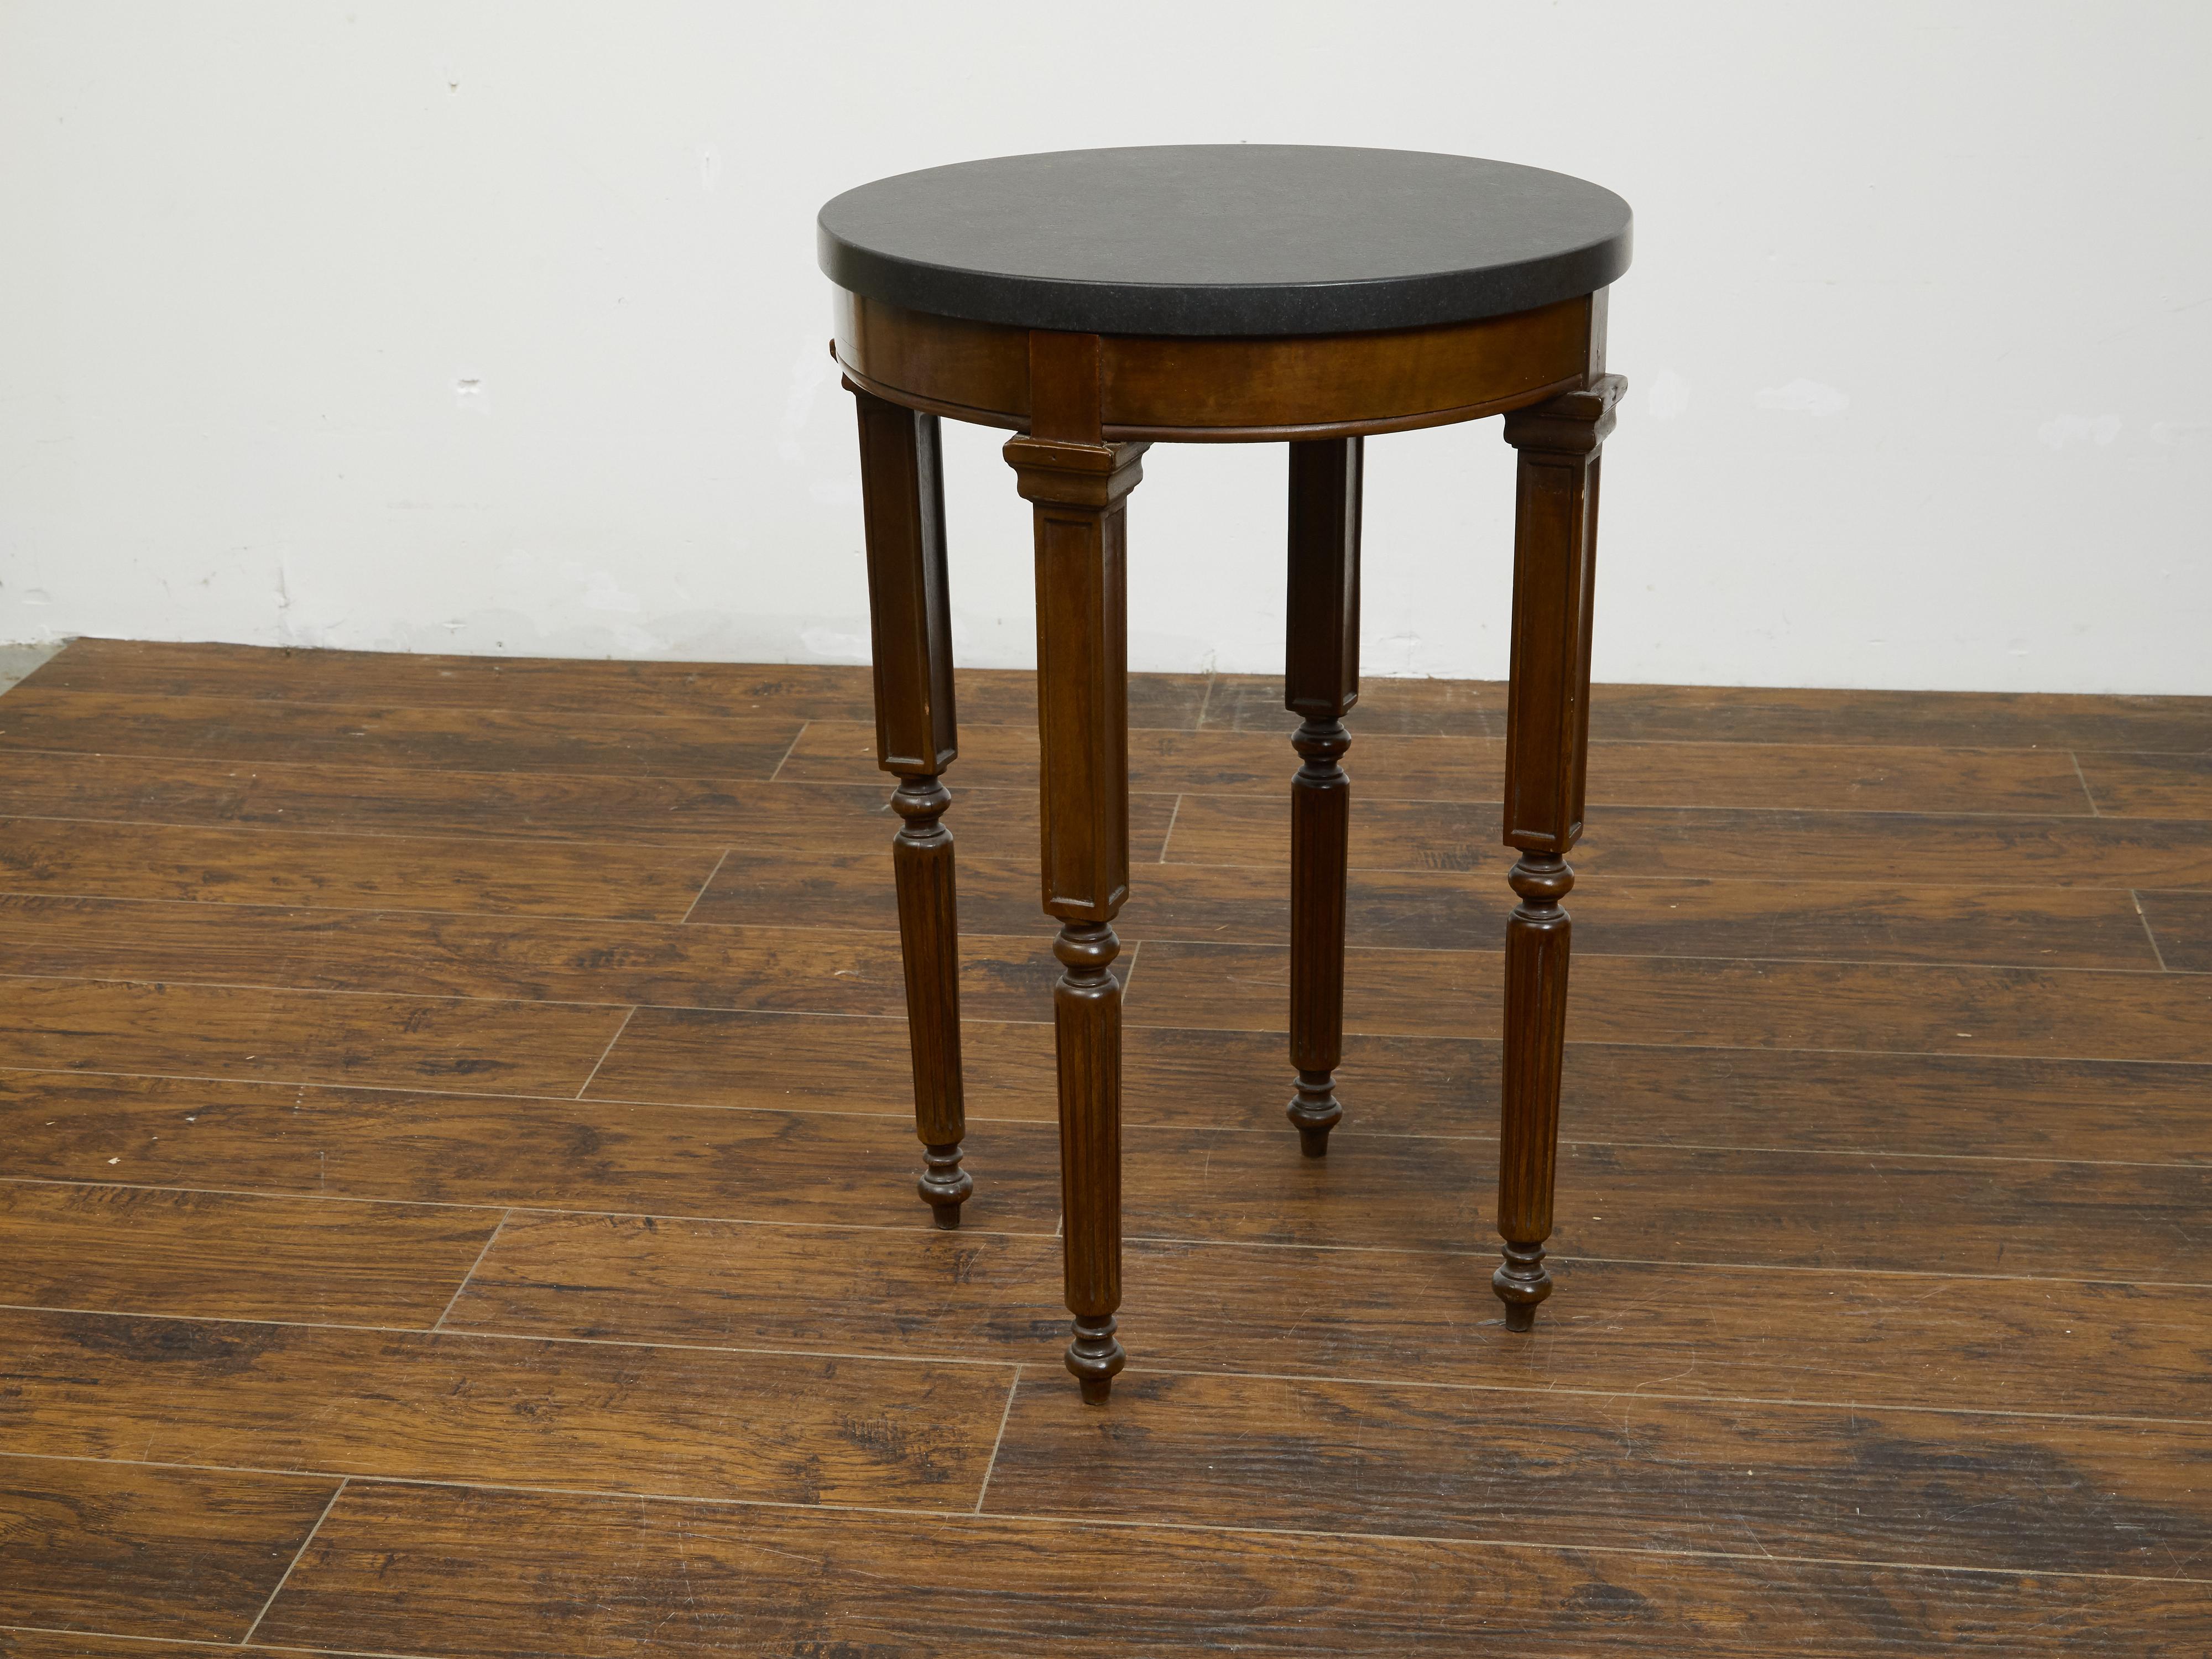 French 19th Century Wooden Guéridon Table with Circular Black Marble Top For Sale 7